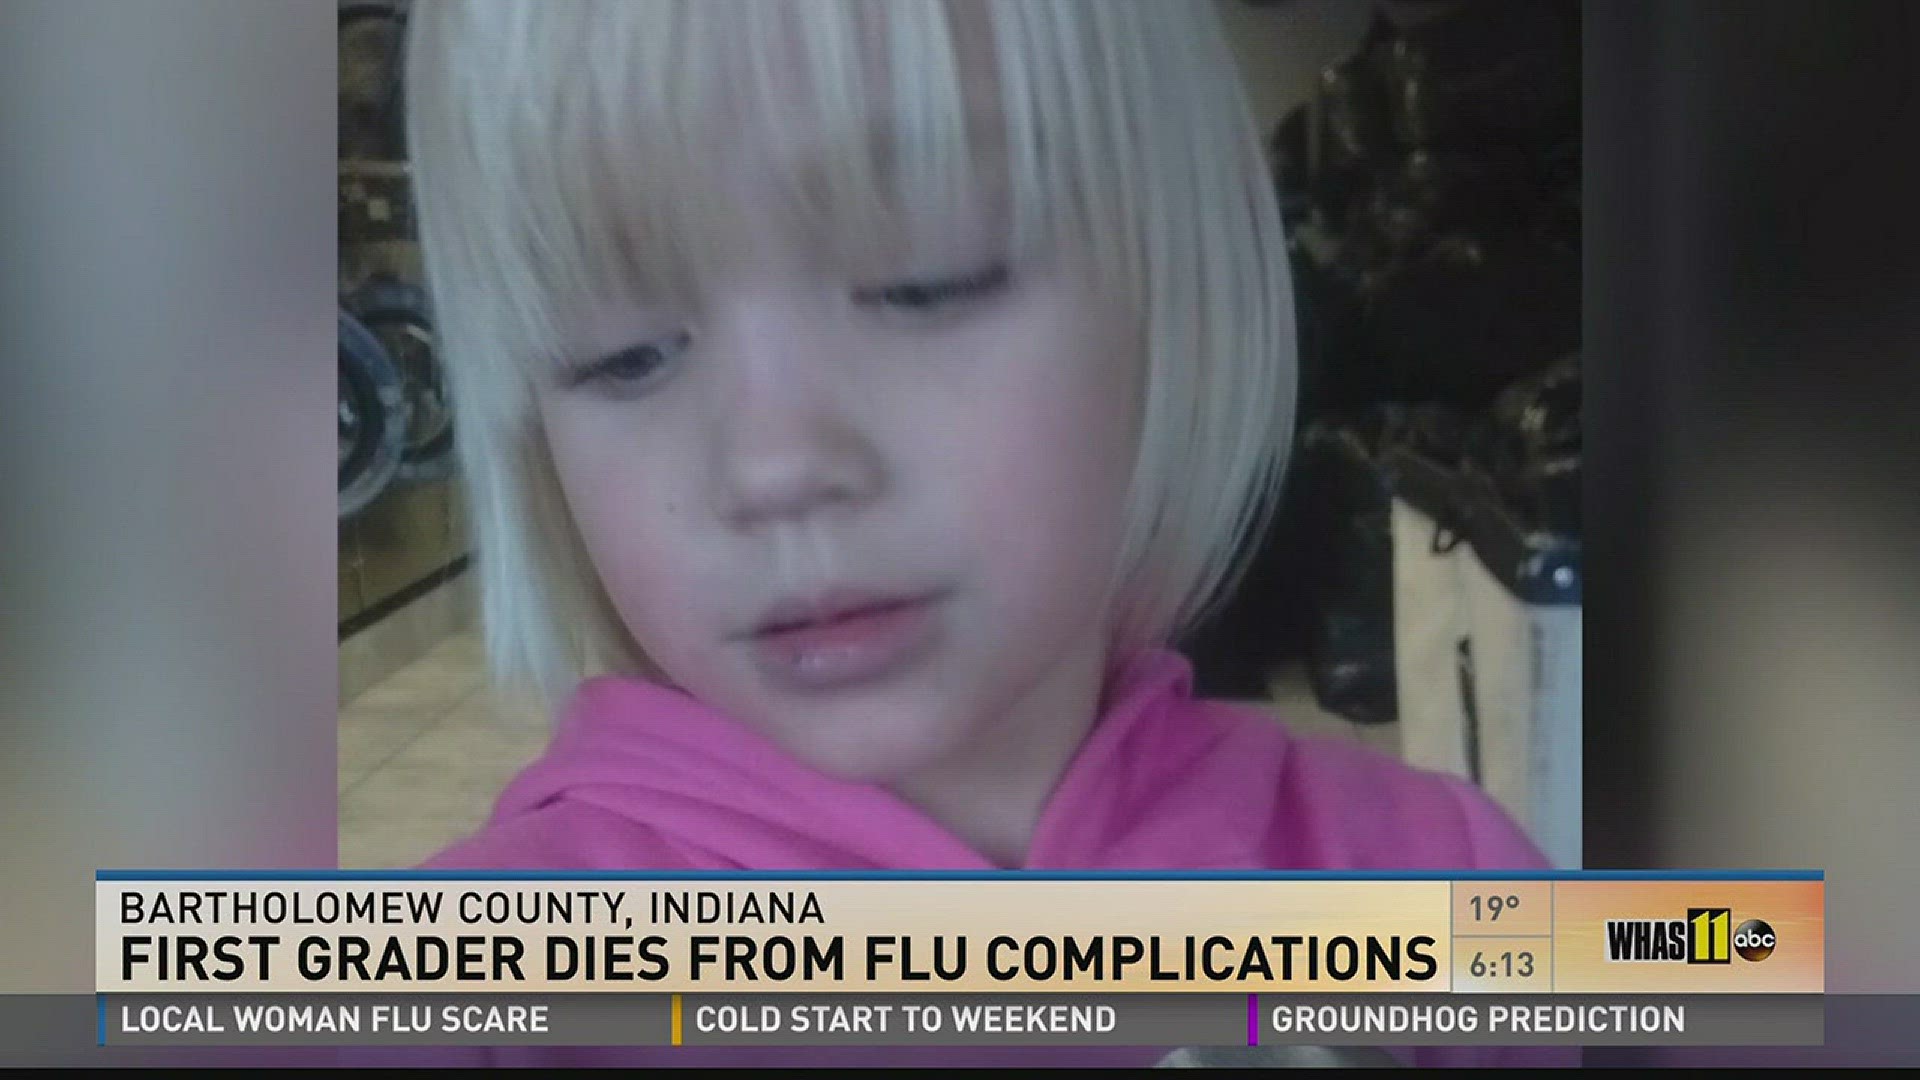 7-year-old Ind. girl dies after flu diagnosis